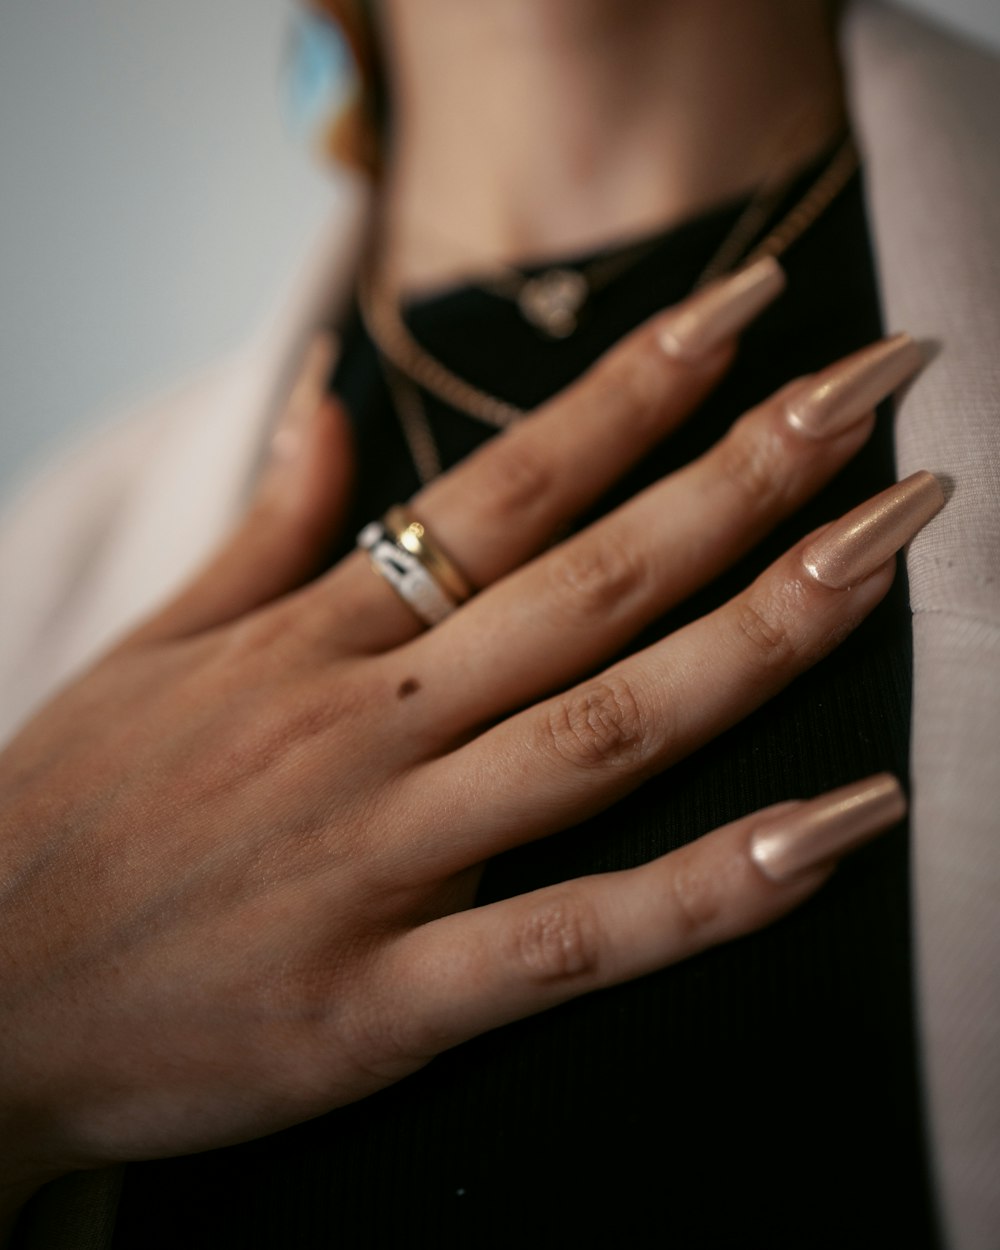 a woman's hands with two rings on her fingers